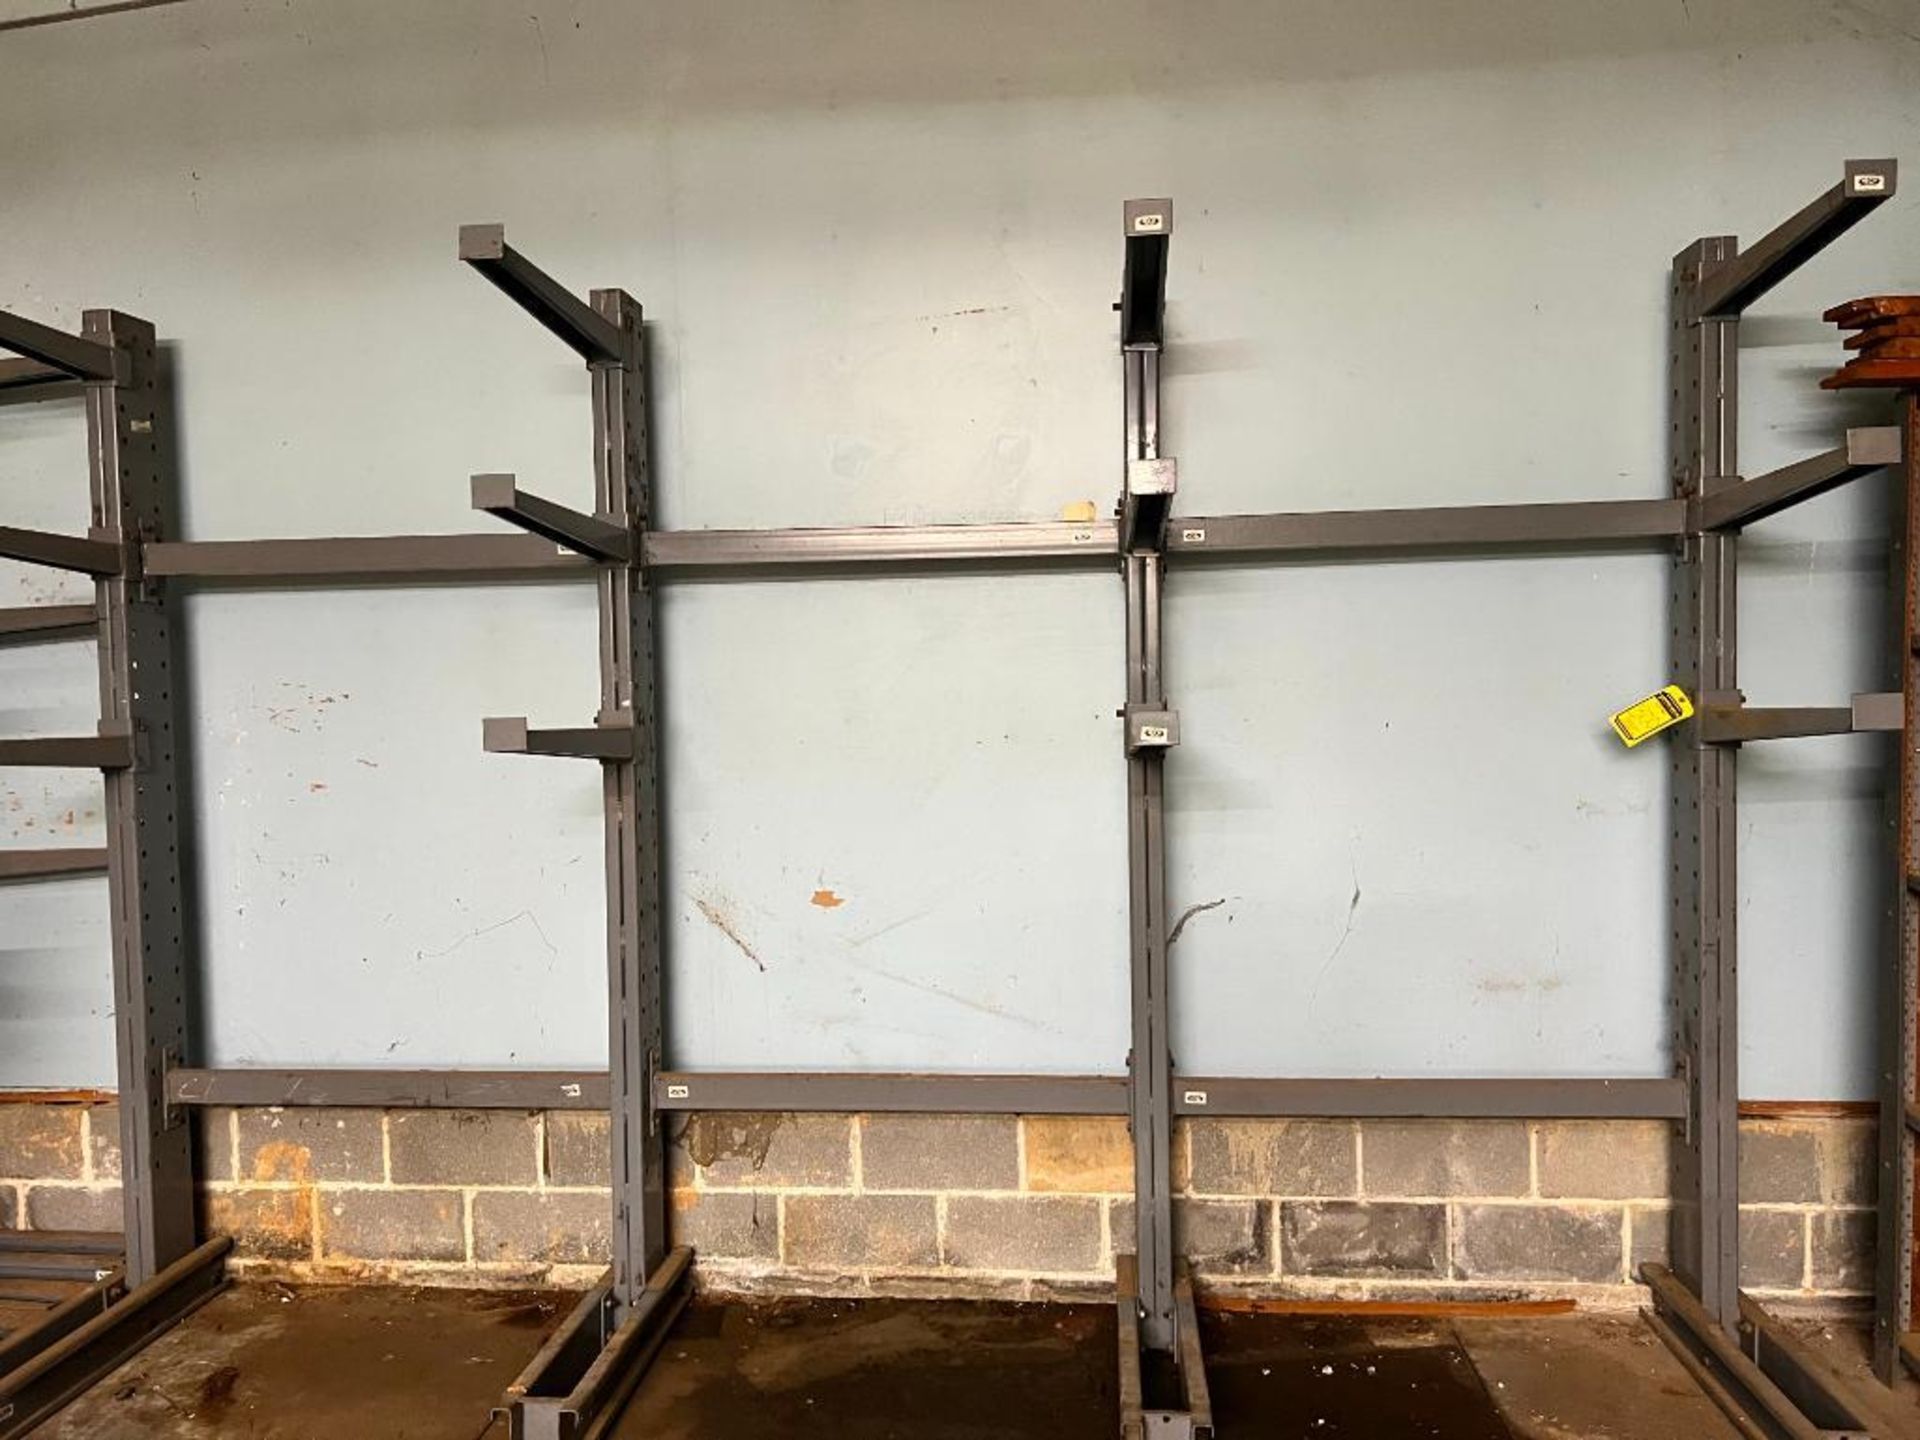 Cantilever Rack ($25 Loading fee will be added to buyers invoice)